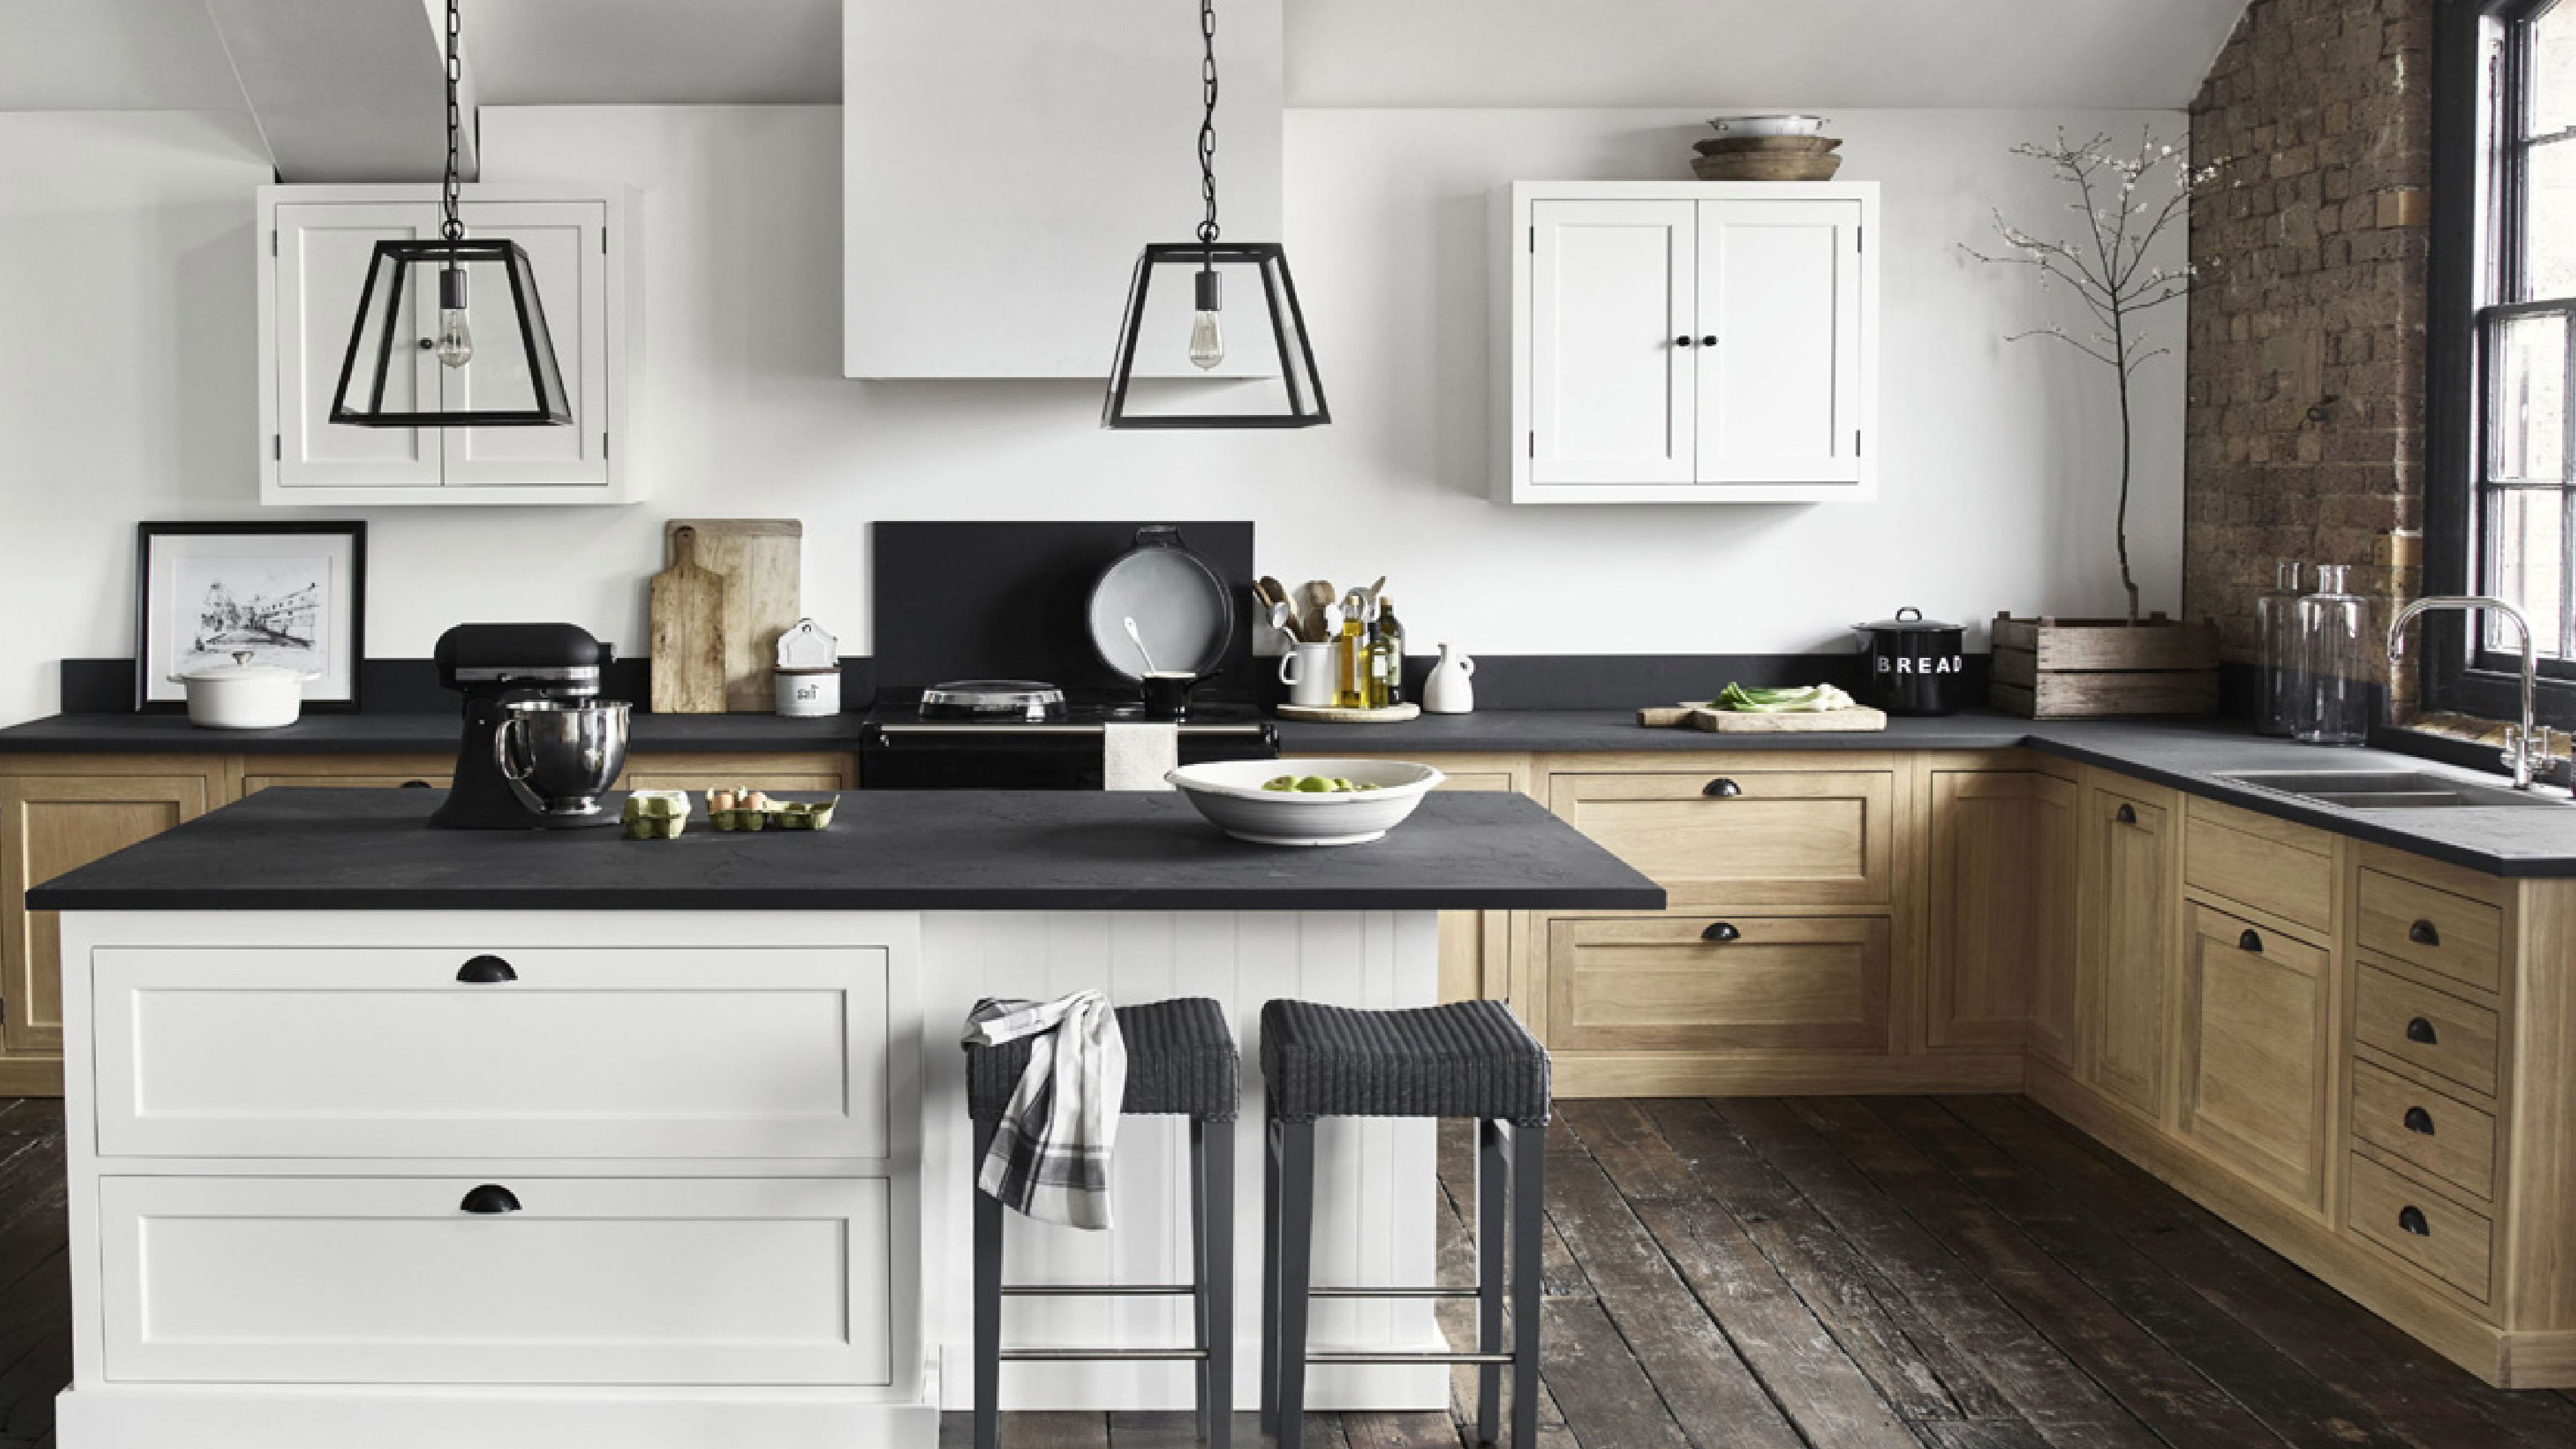 25 kitchen interior design tips from an expert – create your dream ...